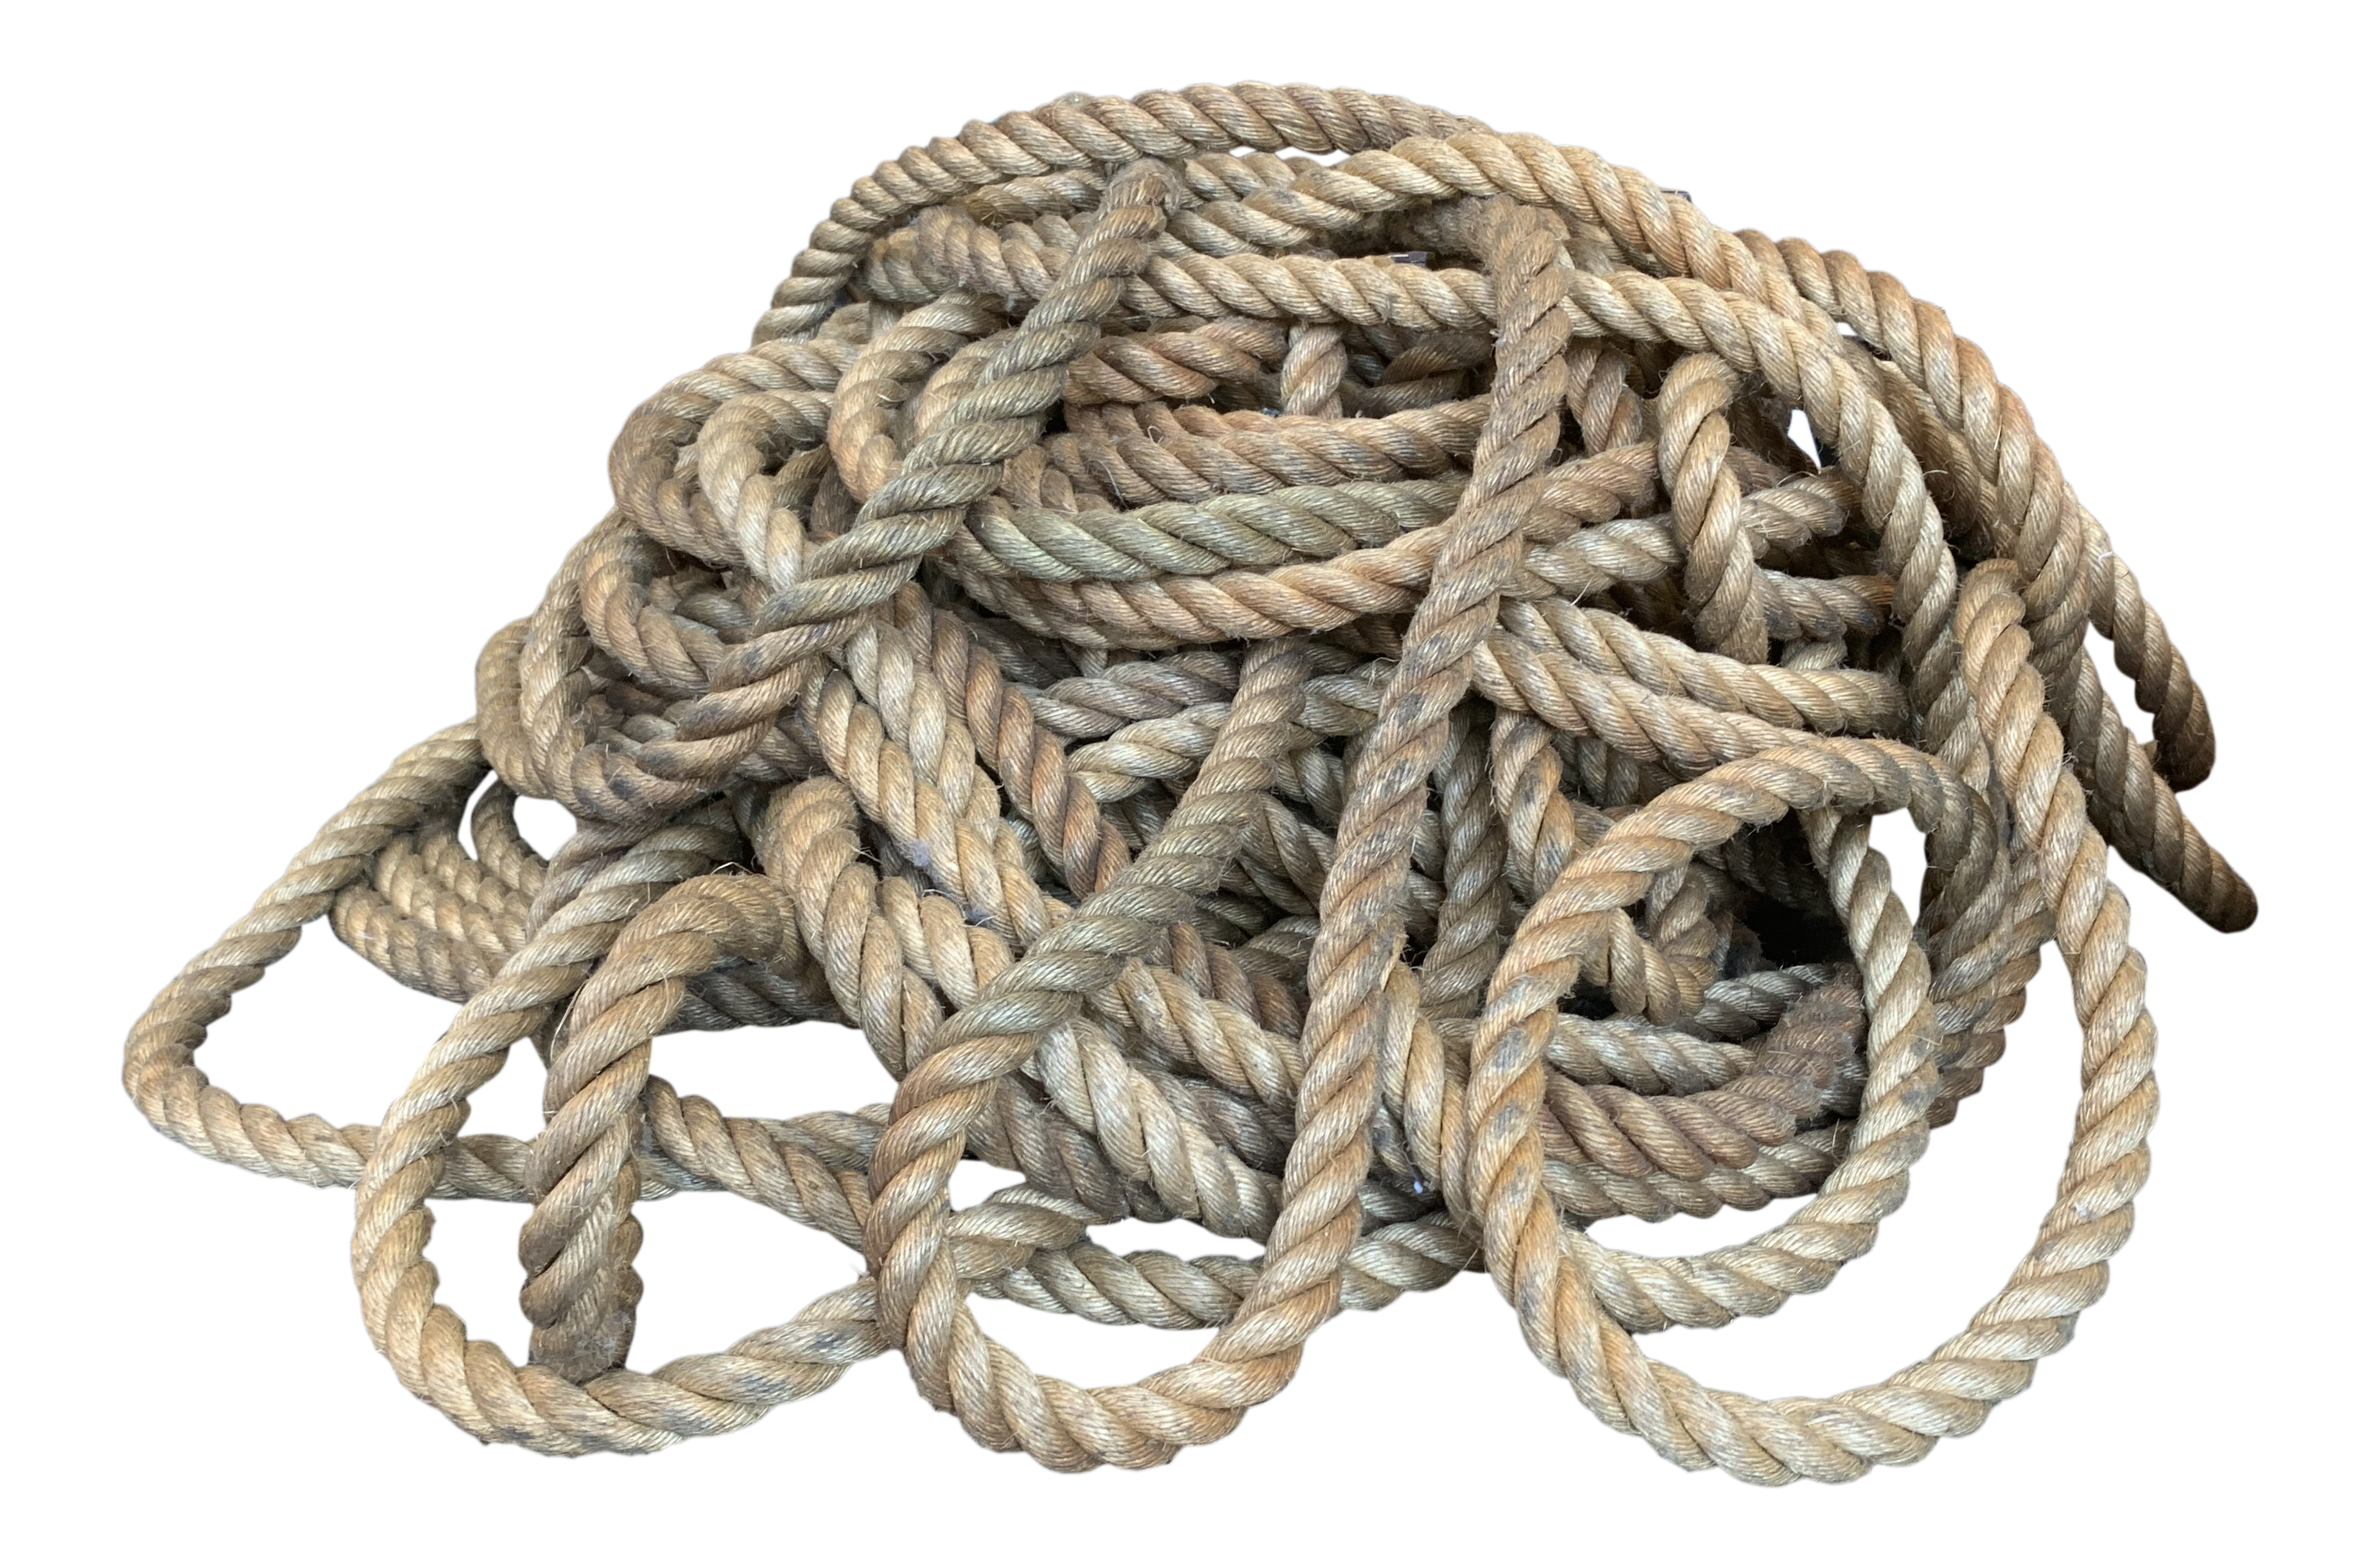 https://willwick.com/wp-content/uploads/2020/04/heavy-duty-rustic-rope-4246.png